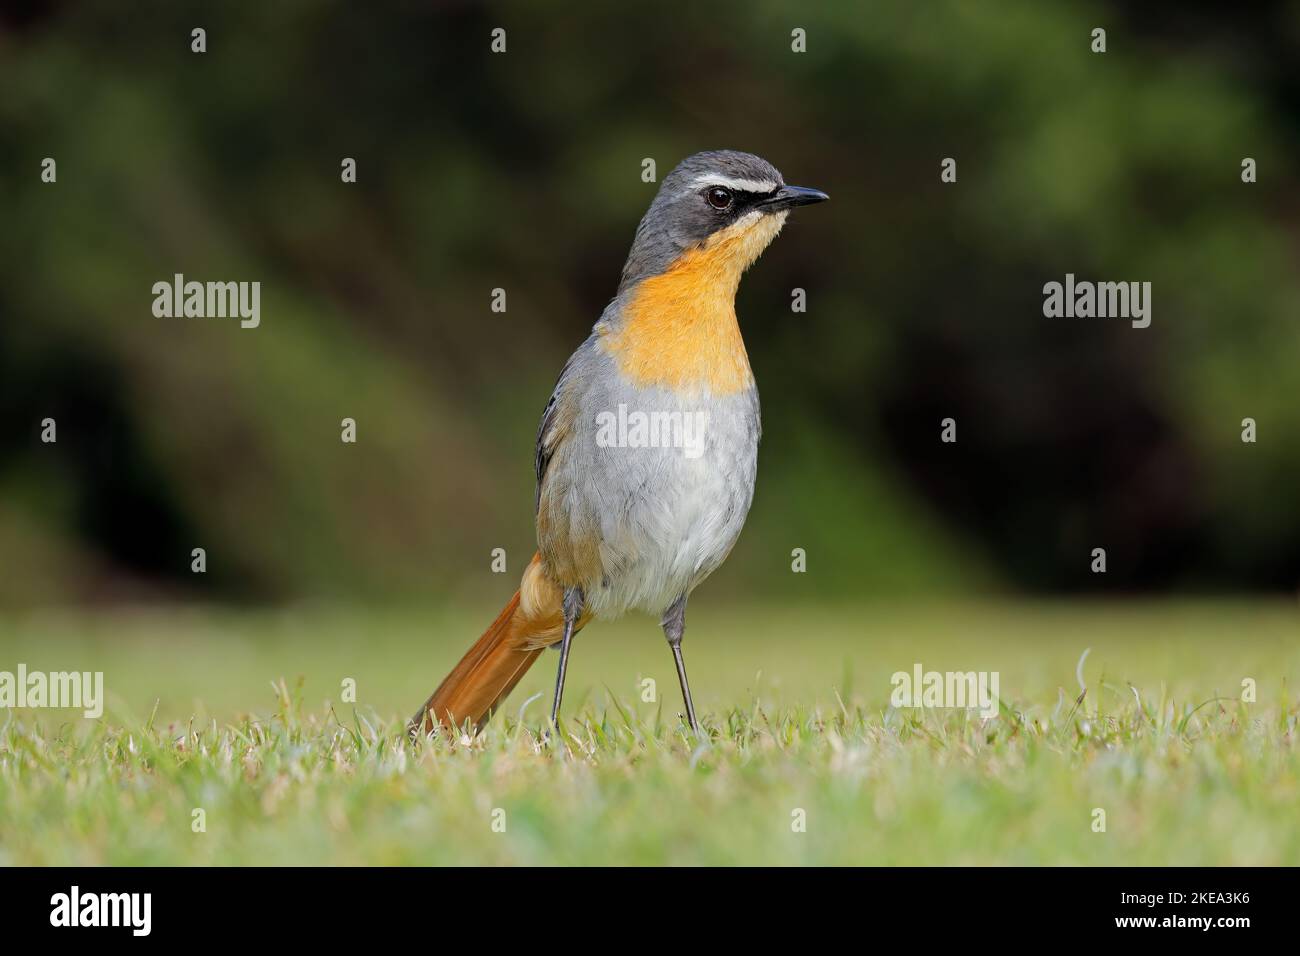 A colorful Cape robin-chat (Cossypha caffra) perched on the ground, South Africa Stock Photo